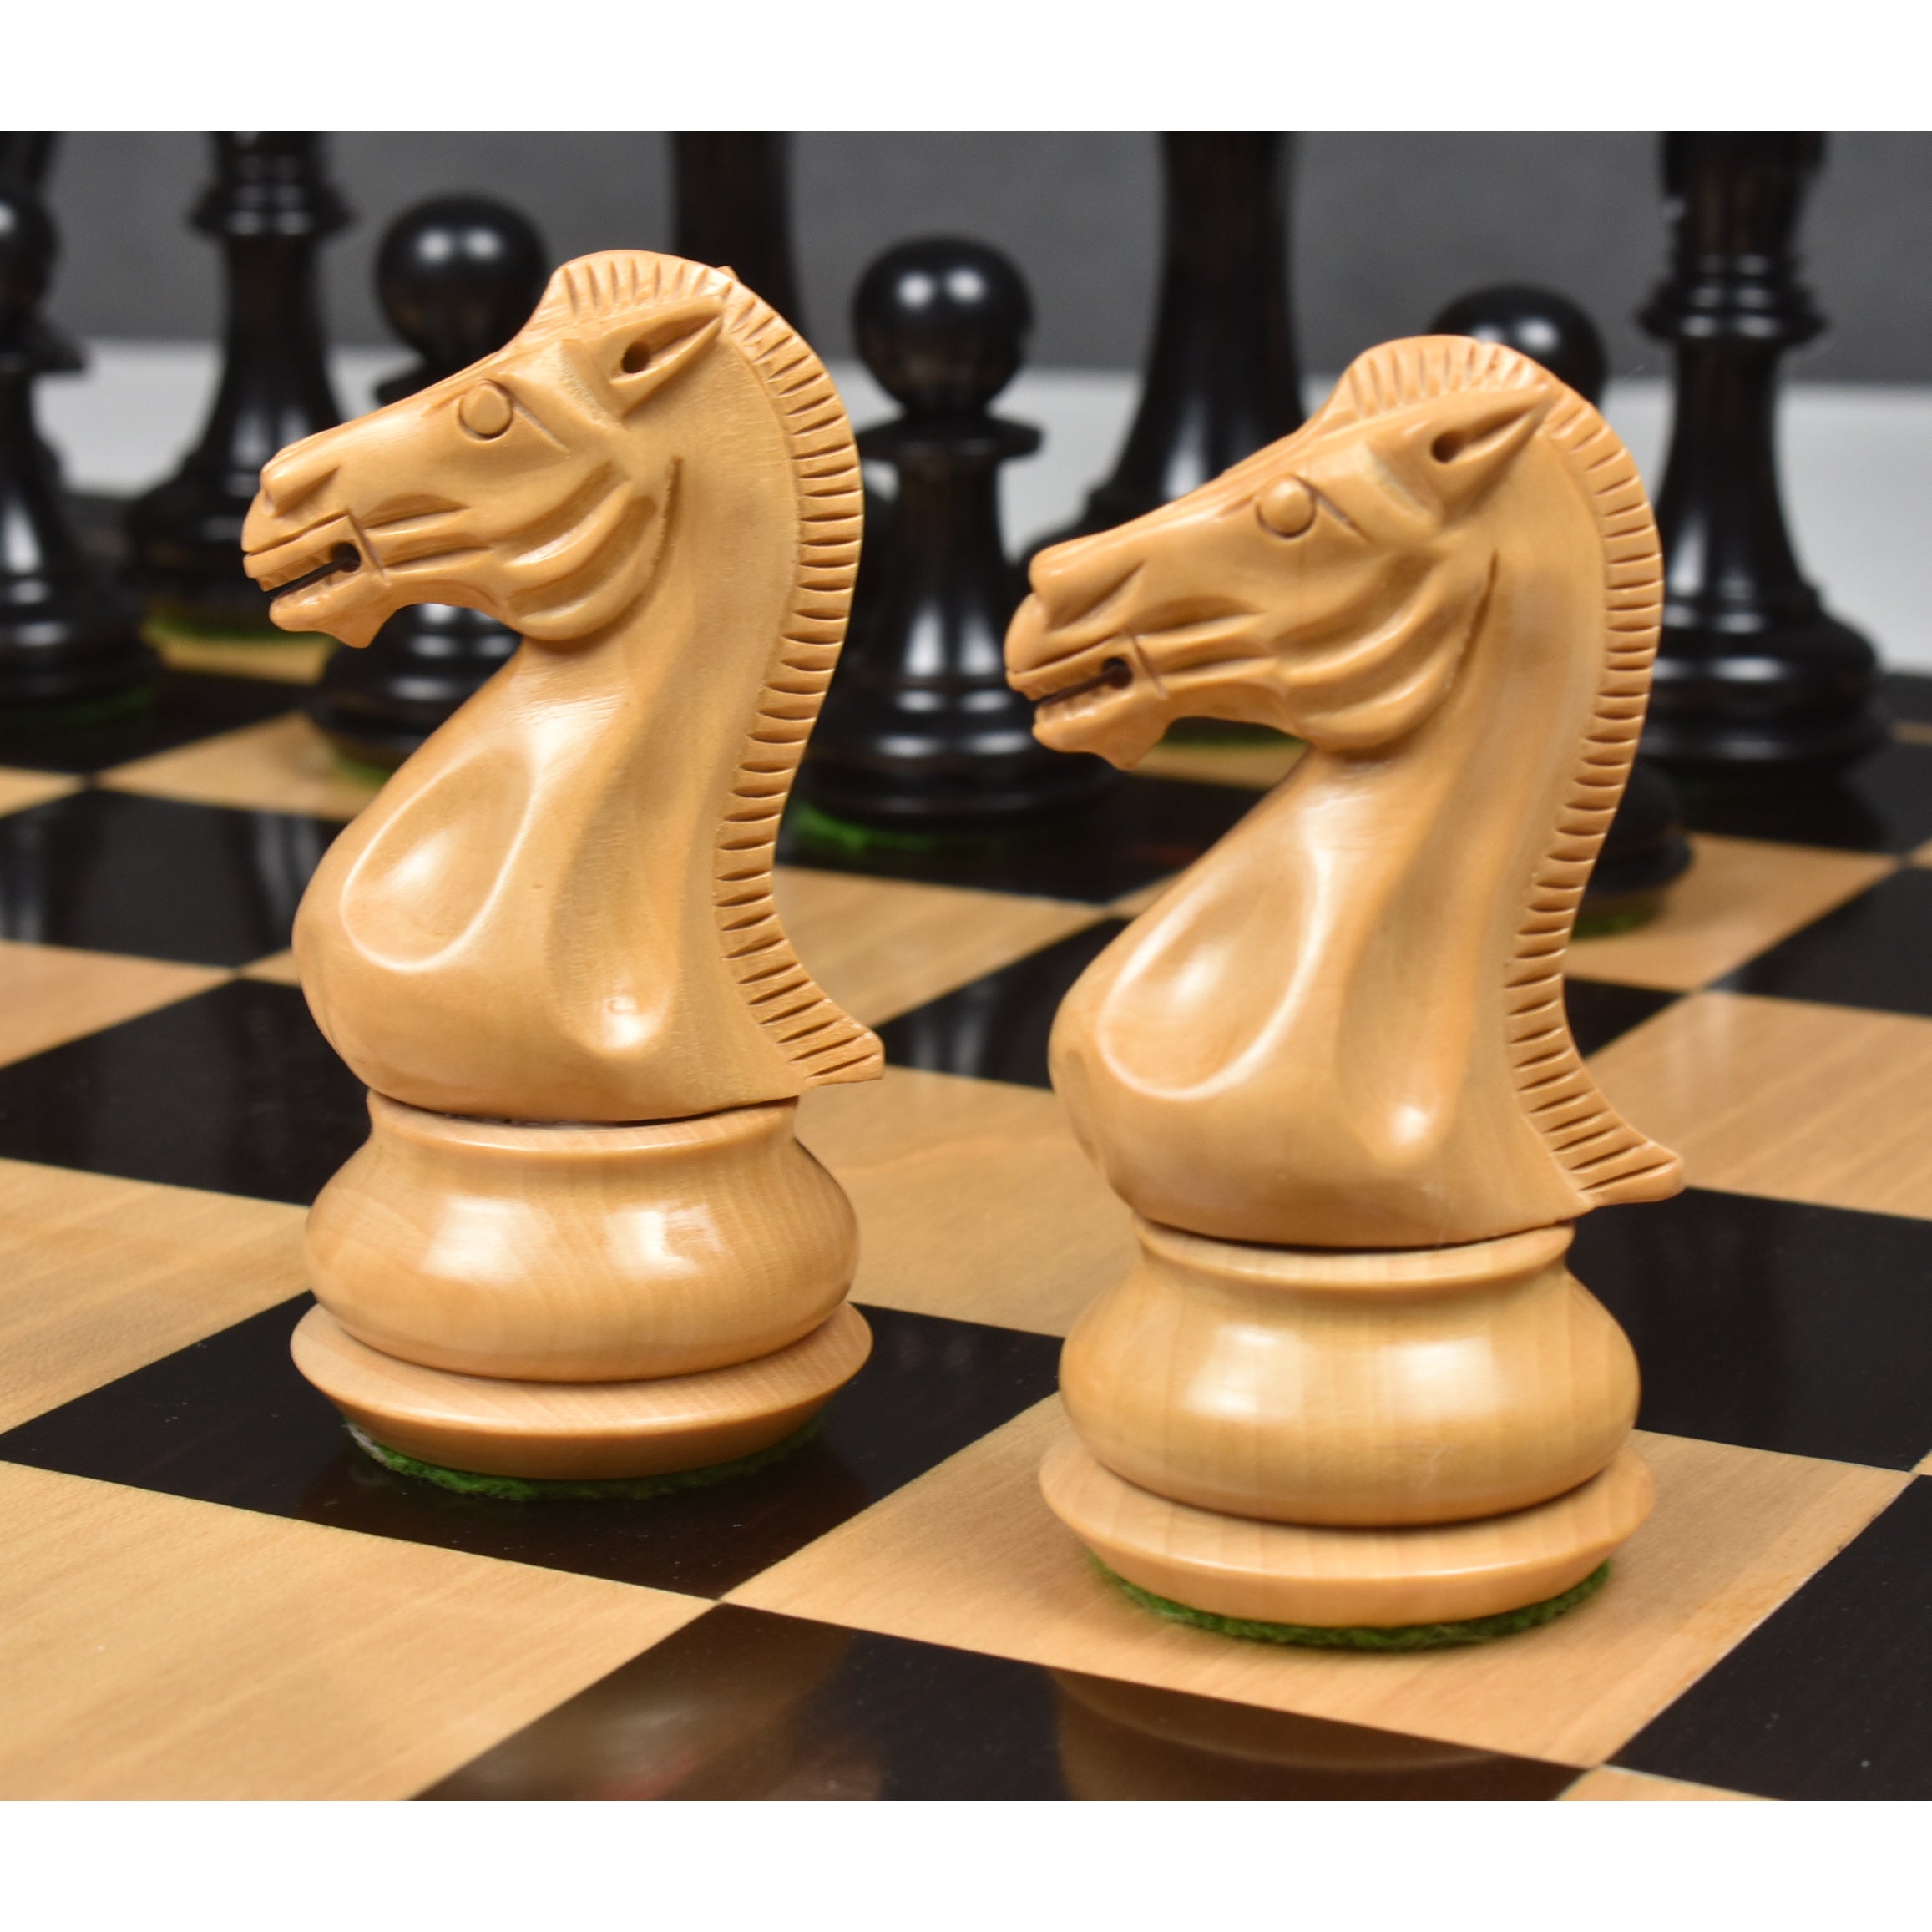 Slightly Imperfect 4.1" Chamfered Base Staunton Chess Pieces Only set